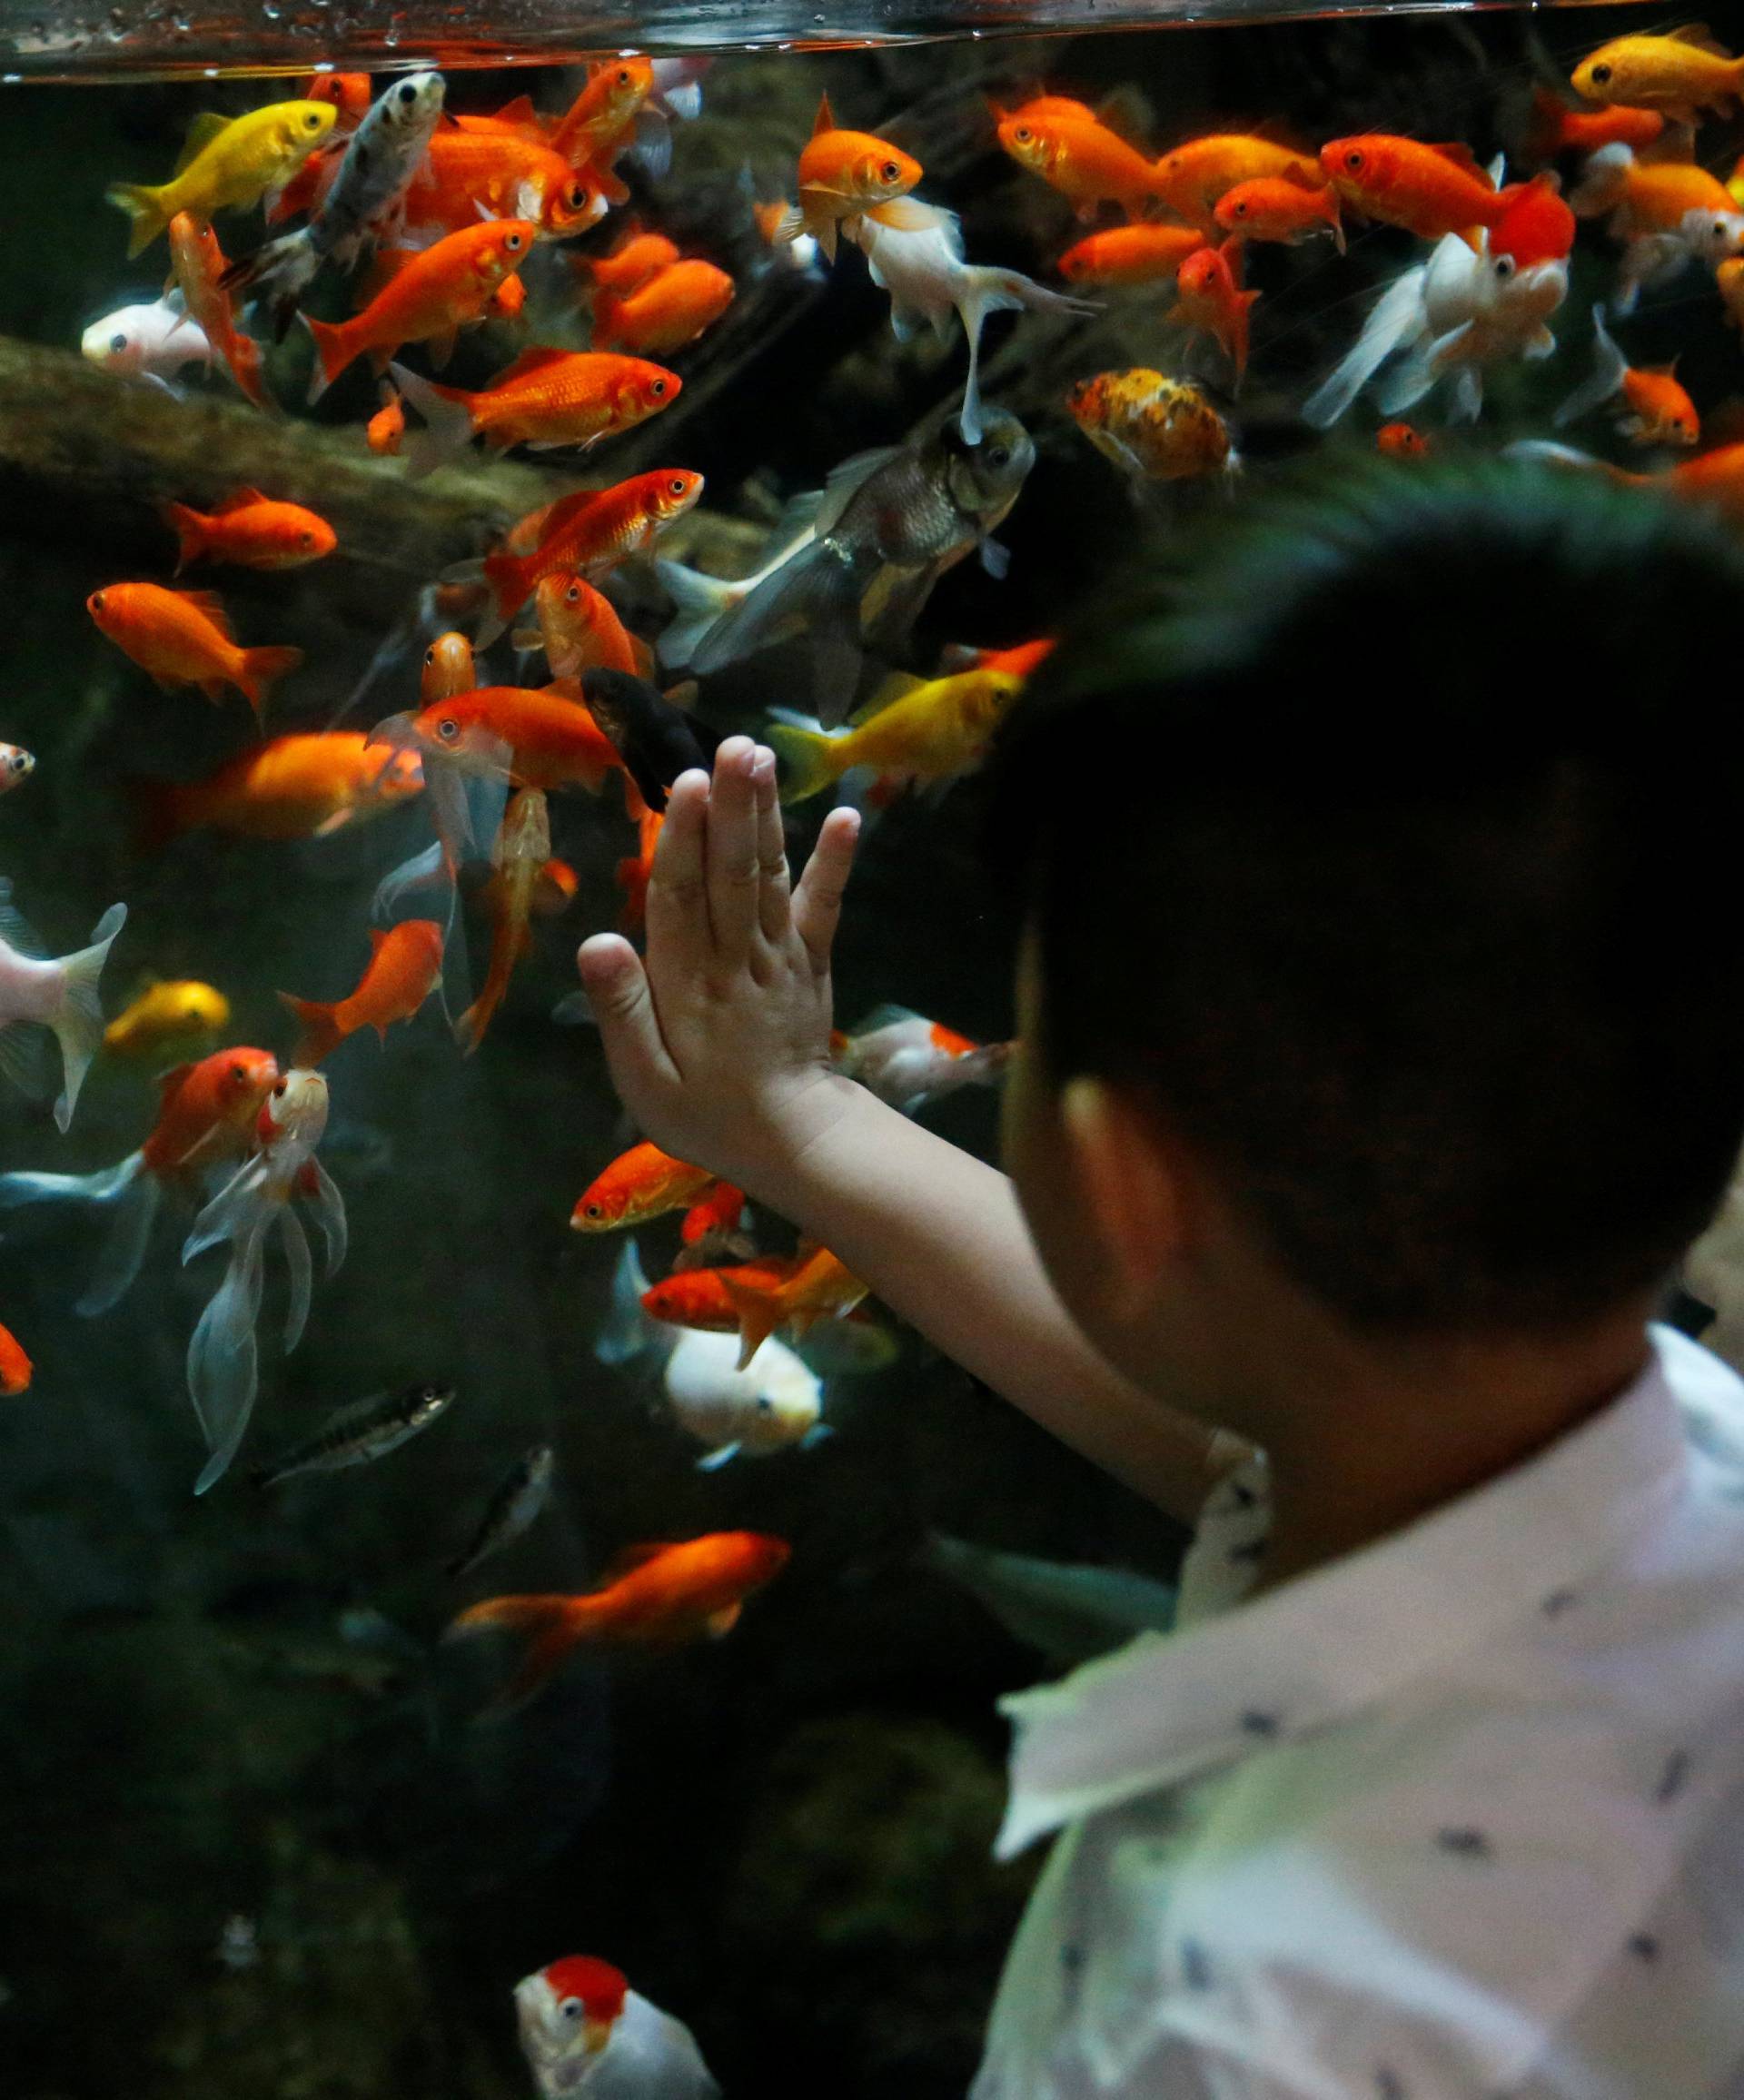 A young boy watches a goldfish aquarium as Paris aquarium launched an operation to take care of hundreds of goldfish abandoned by French holiday-makers, in Paris